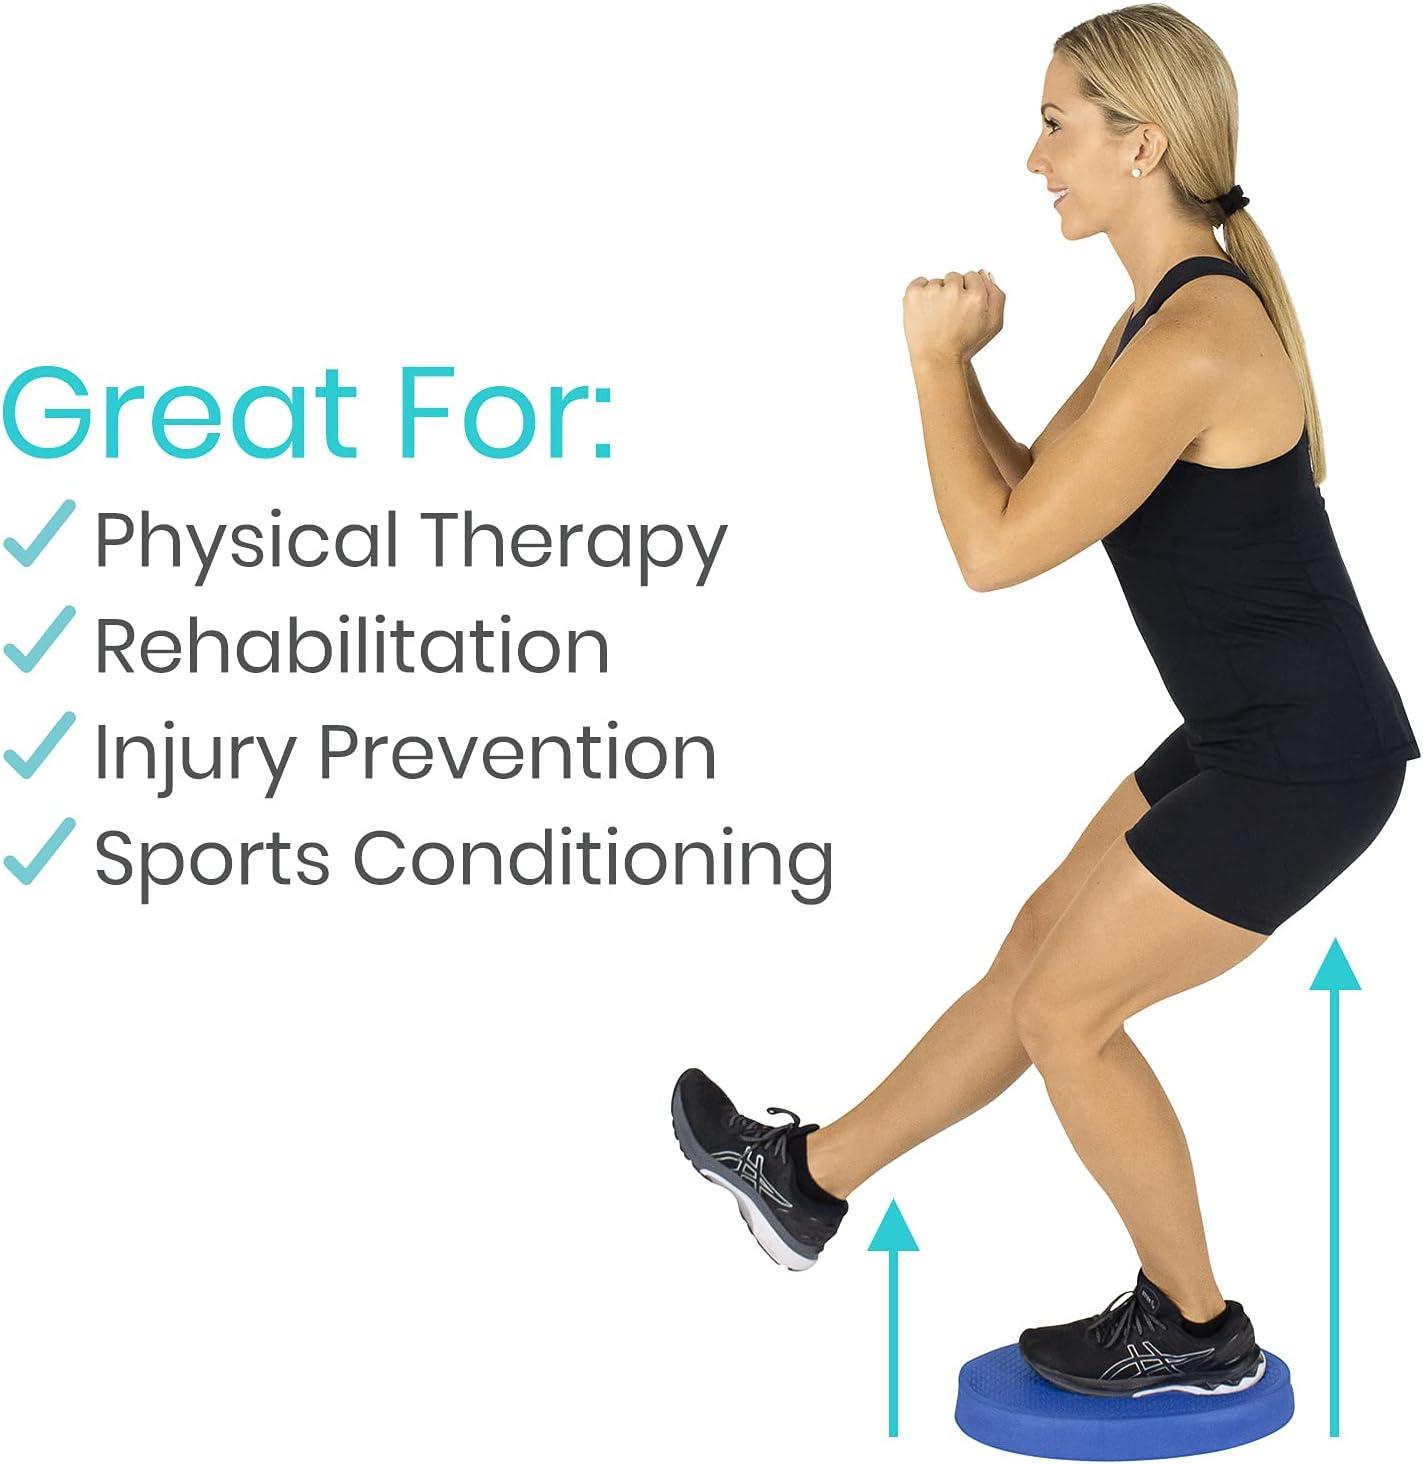 The Benefits of Using Balance Pads for Exercise and Rehabilitation –  Physiosupplies